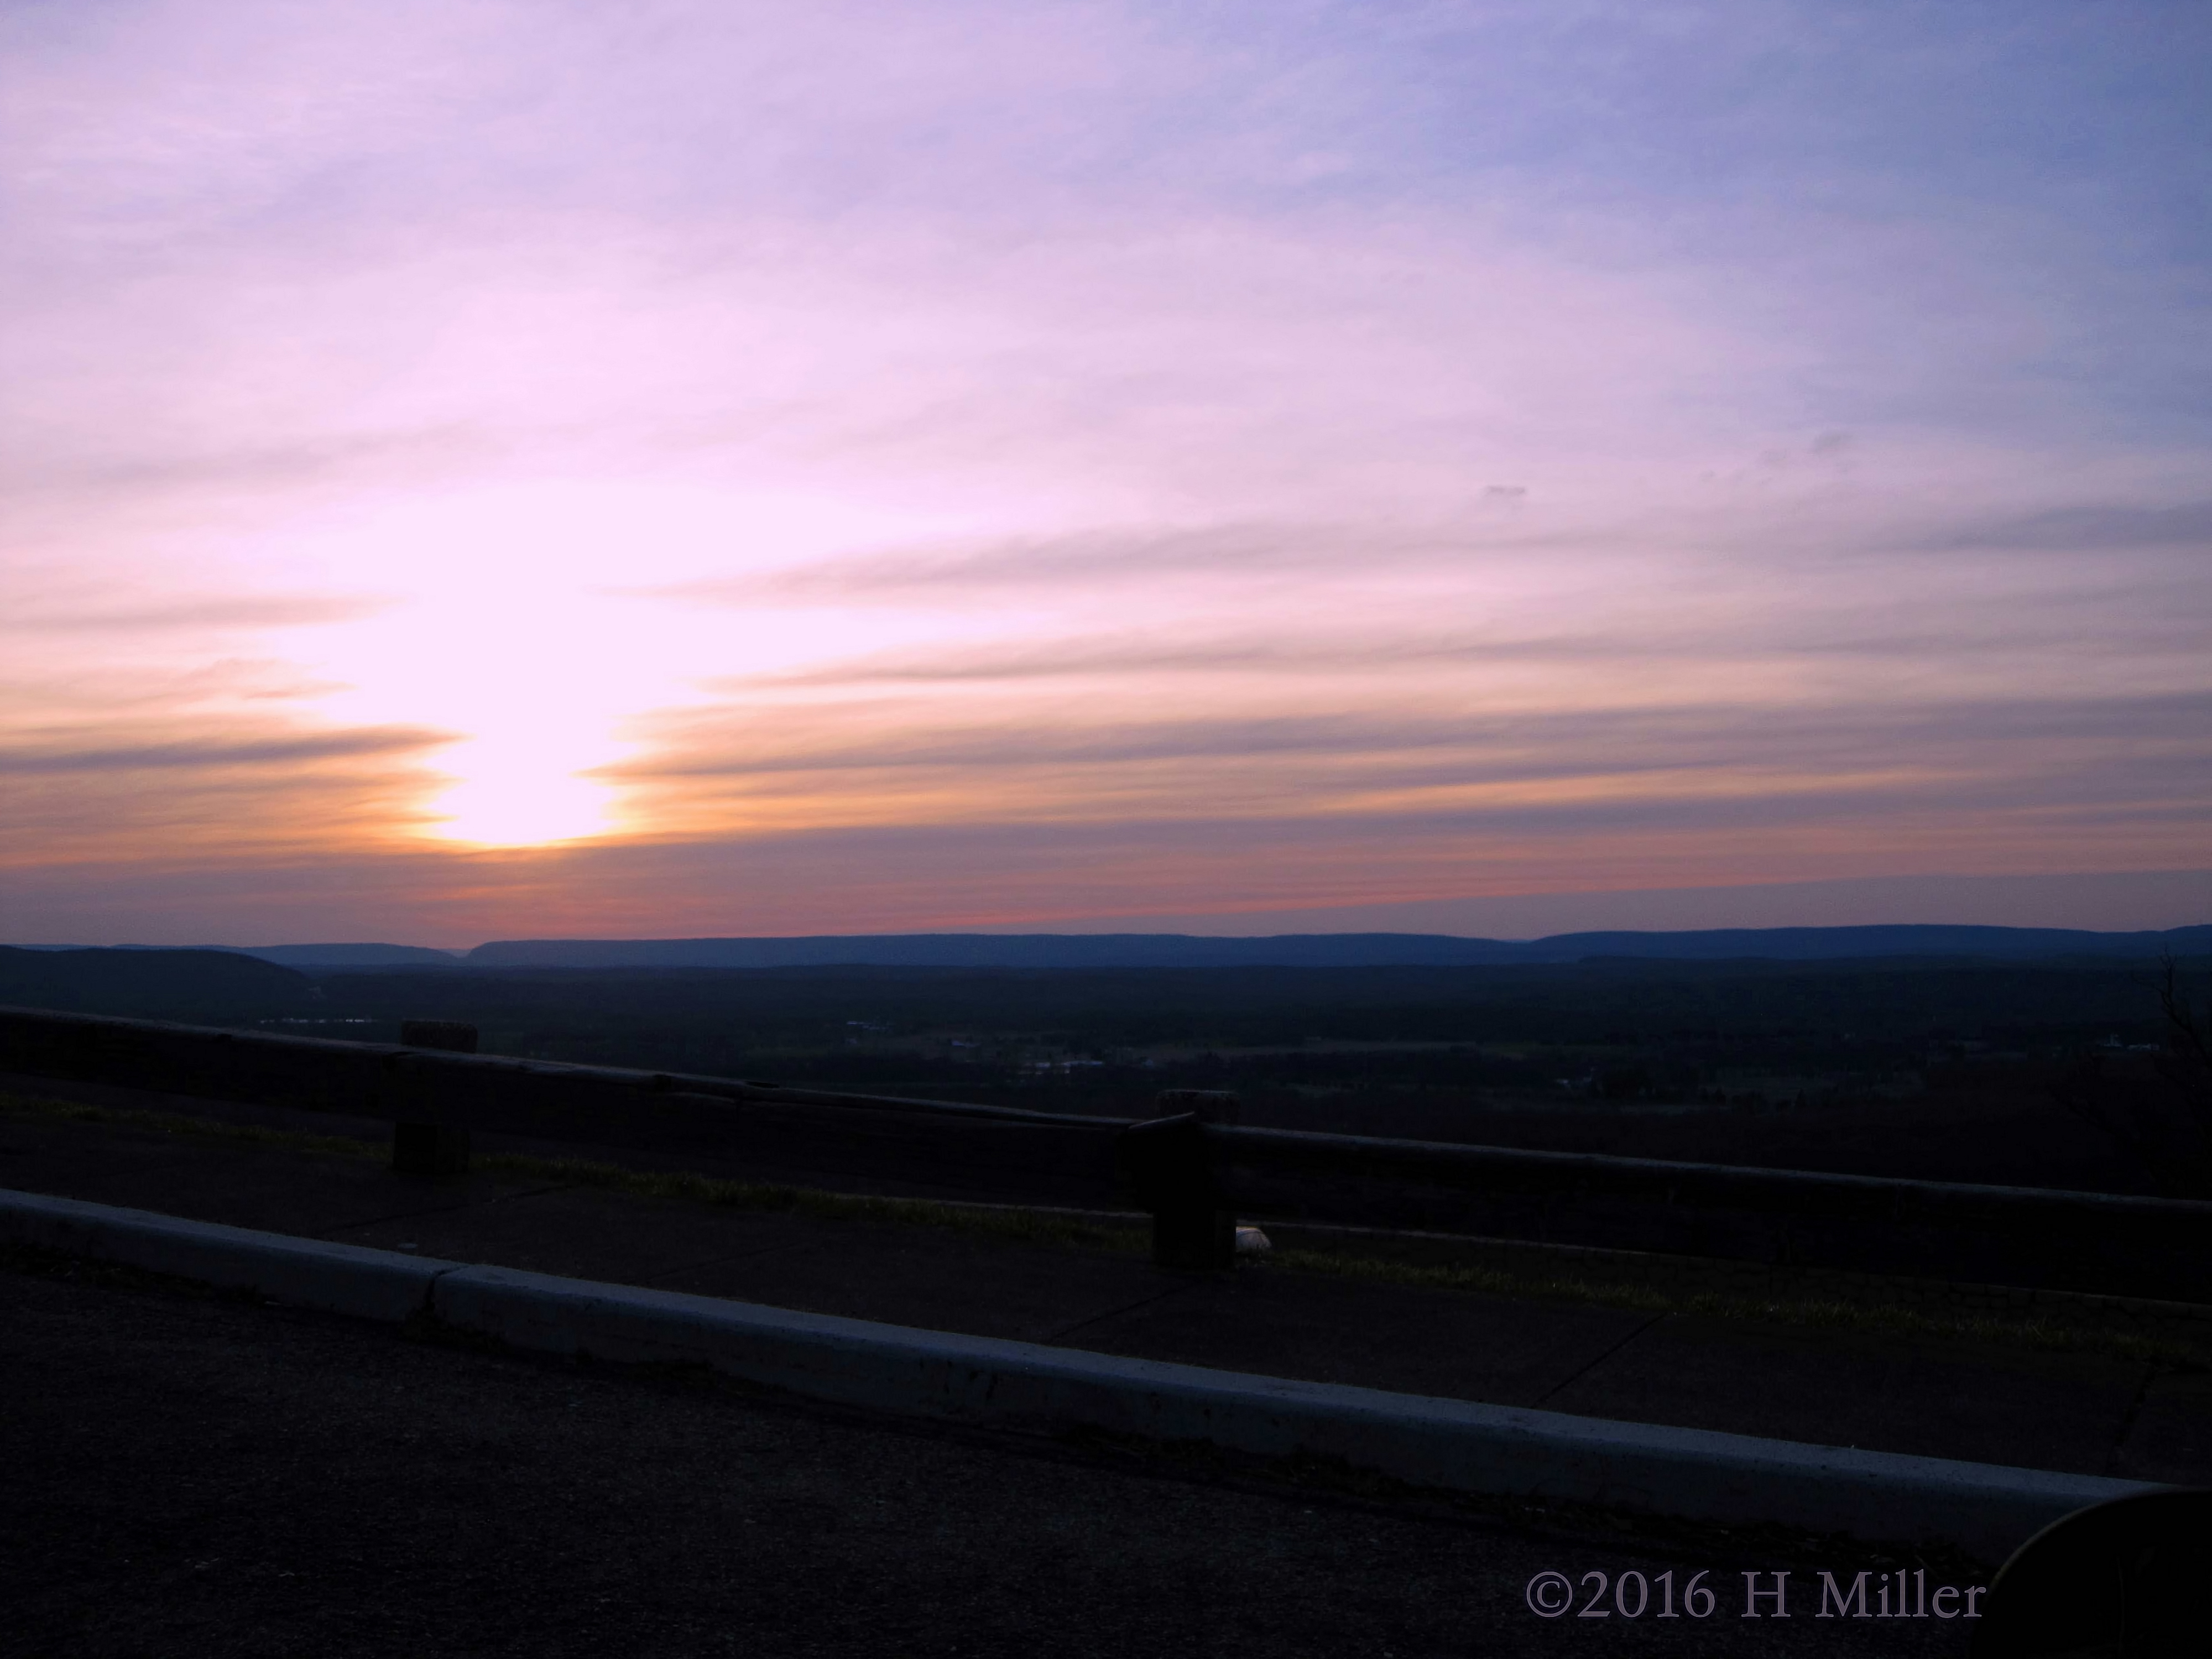 The Lookout Point Driving Back Has Such A Wonderful View Of The Beautiful Sunset! 